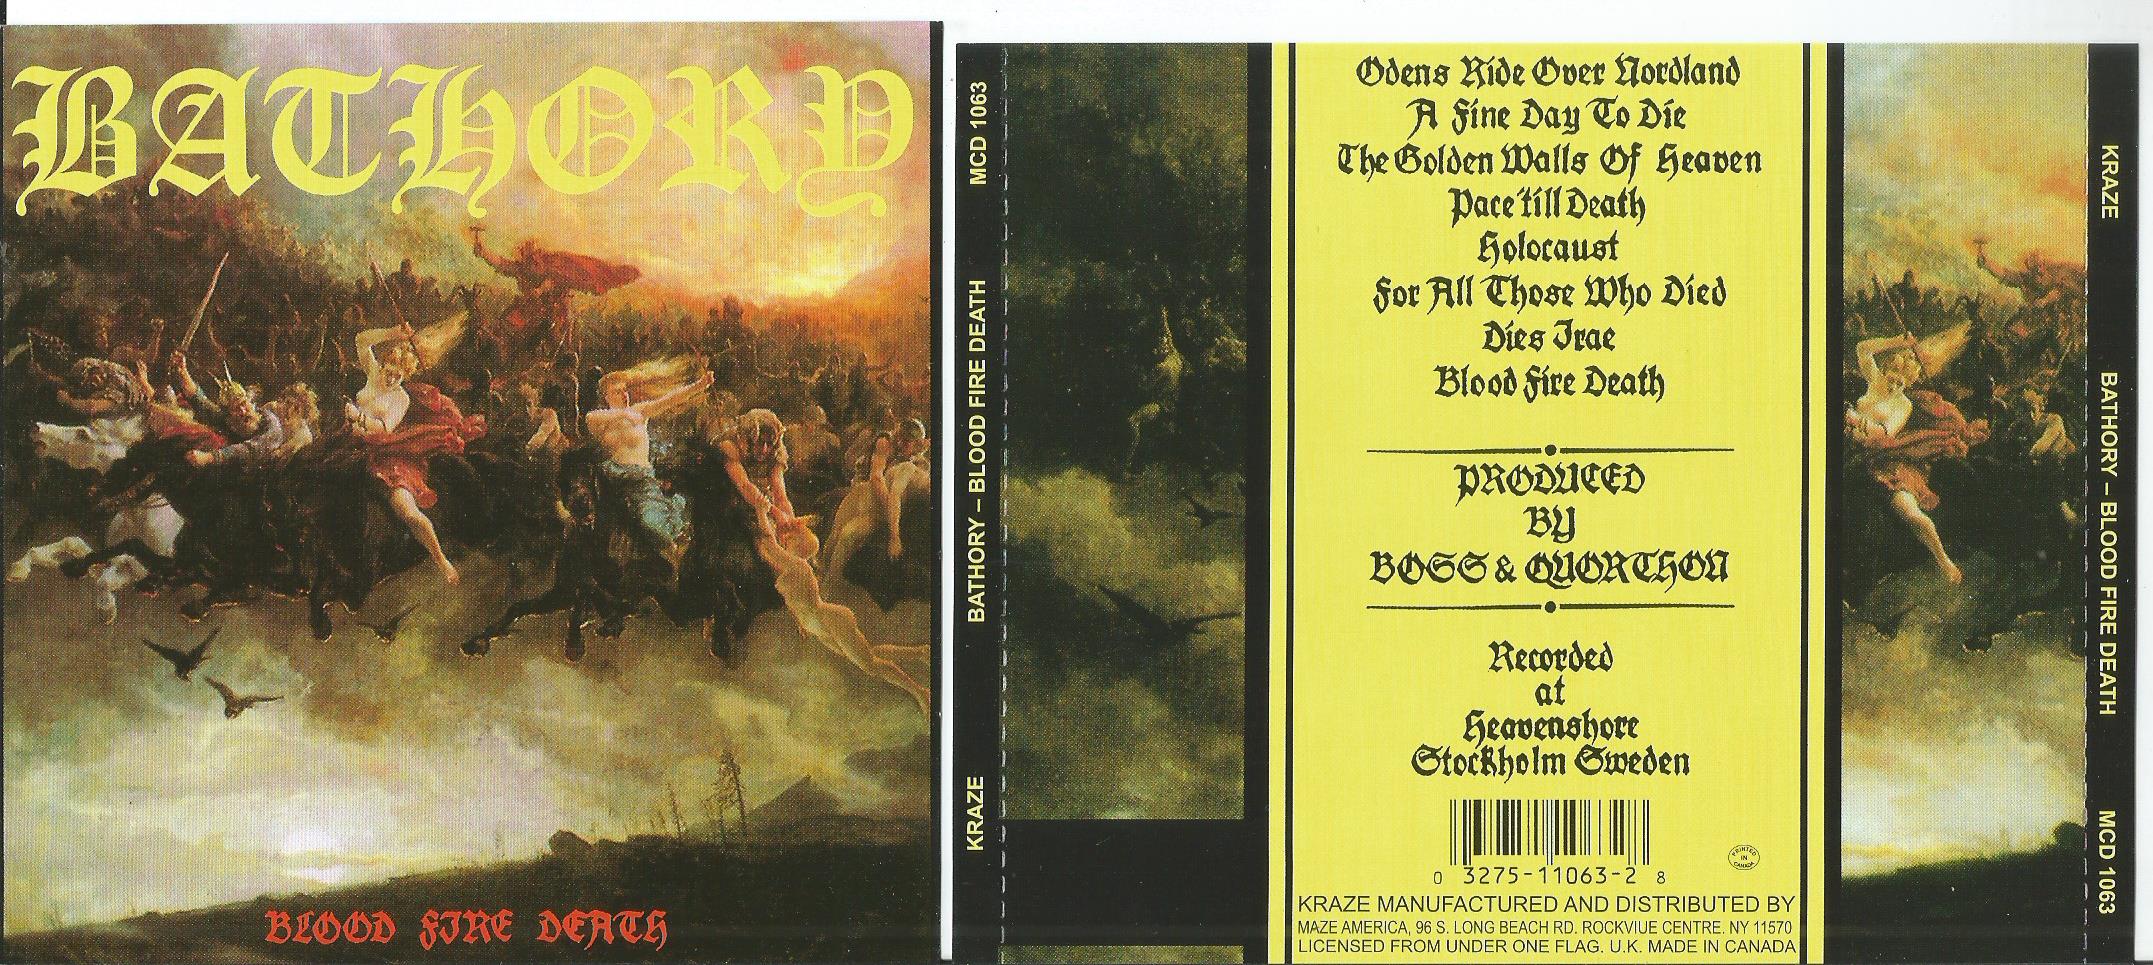 Blood fire death by Bathory, CD with apexmusic Ref